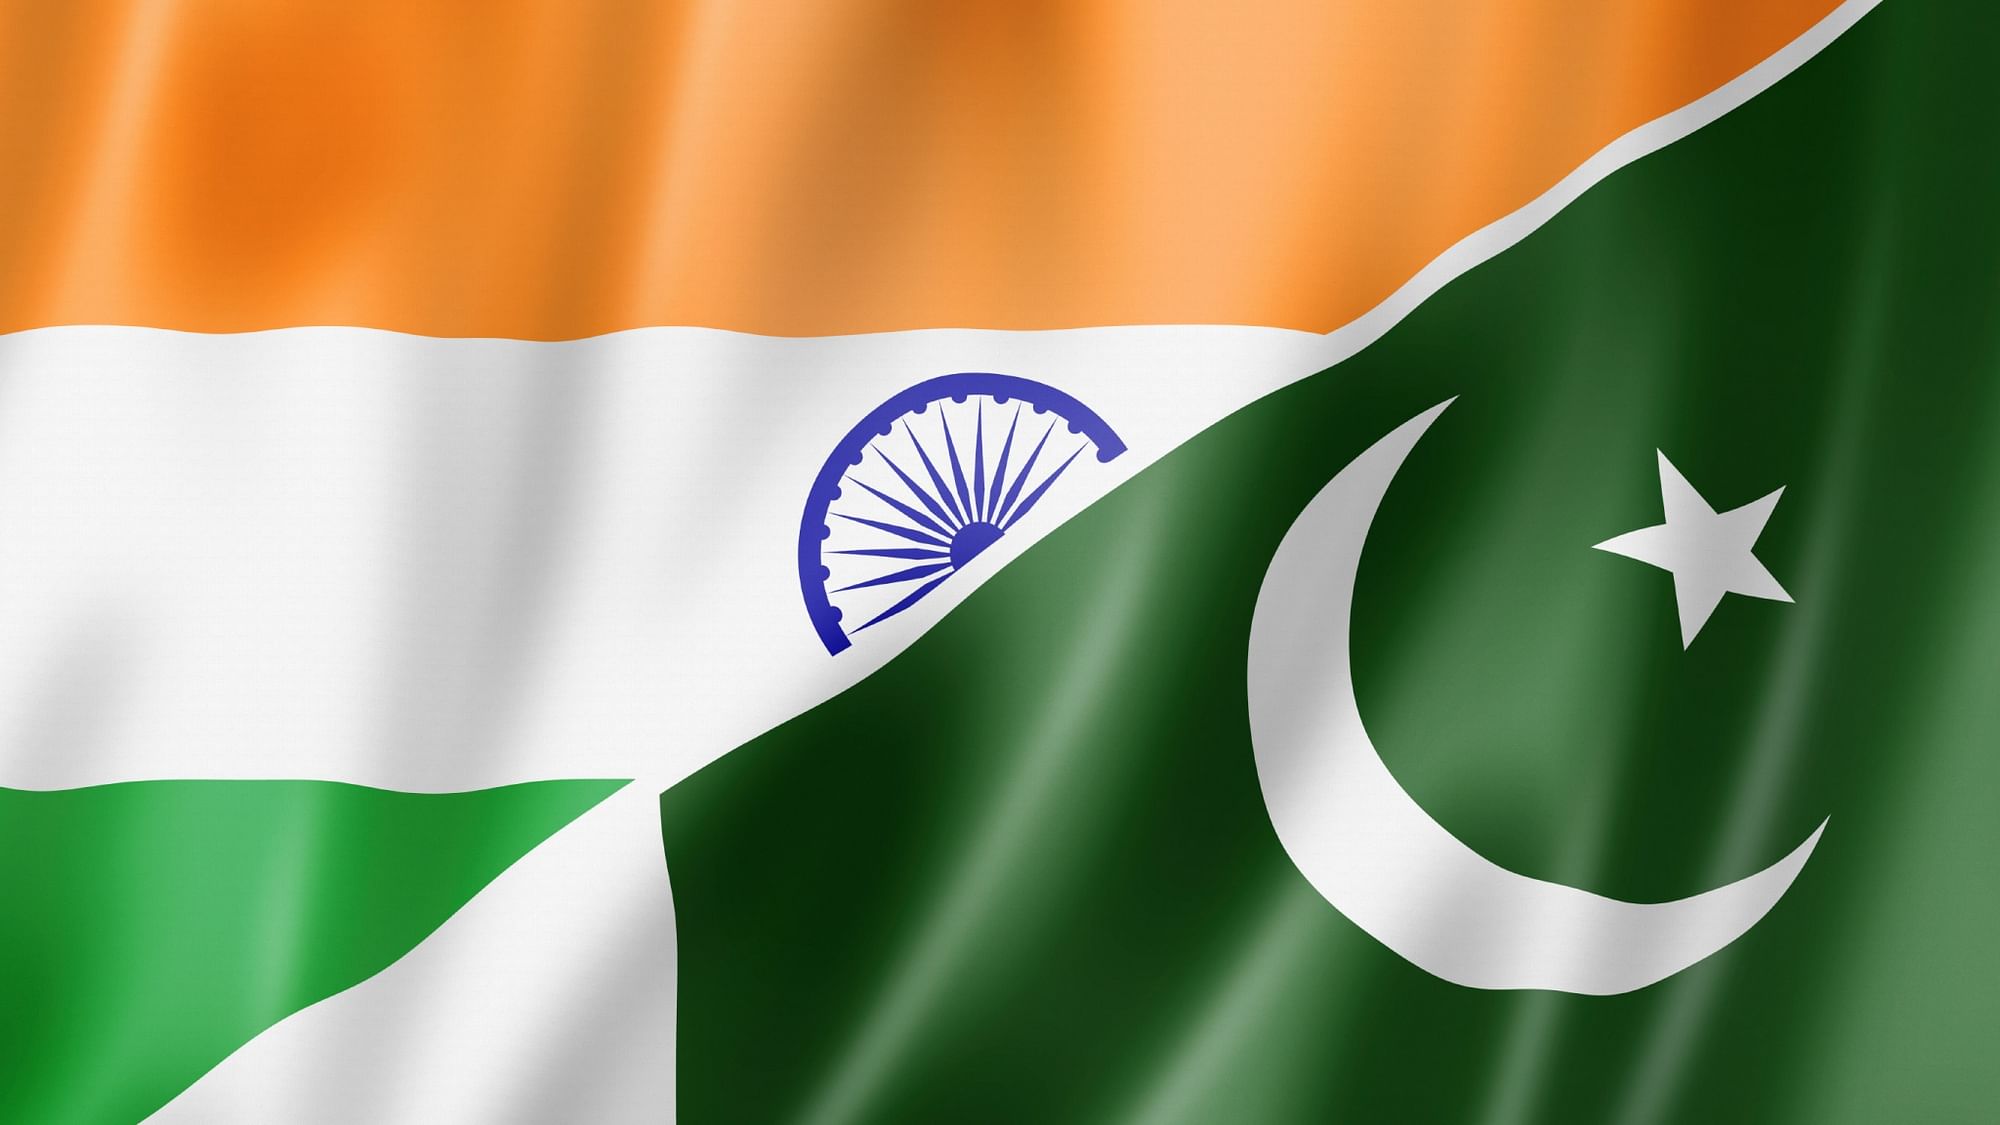 <div class="paragraphs"><p>Pakistan on Monday, 28 December, summoned India’s Charge D’Affaires M Suresh Kumar to the Ministry of Foreign Affairs in Islamabad, over the Pakistan government's concerns regarding the <a href="https://www.thequint.com/news/india/haridwar-hate-speech-case-now-hindu-mahasabha-leader-1-other-booked#read-more">hate speeches</a> recently delivered by Hindutva proponents in Haridwar.</p></div>